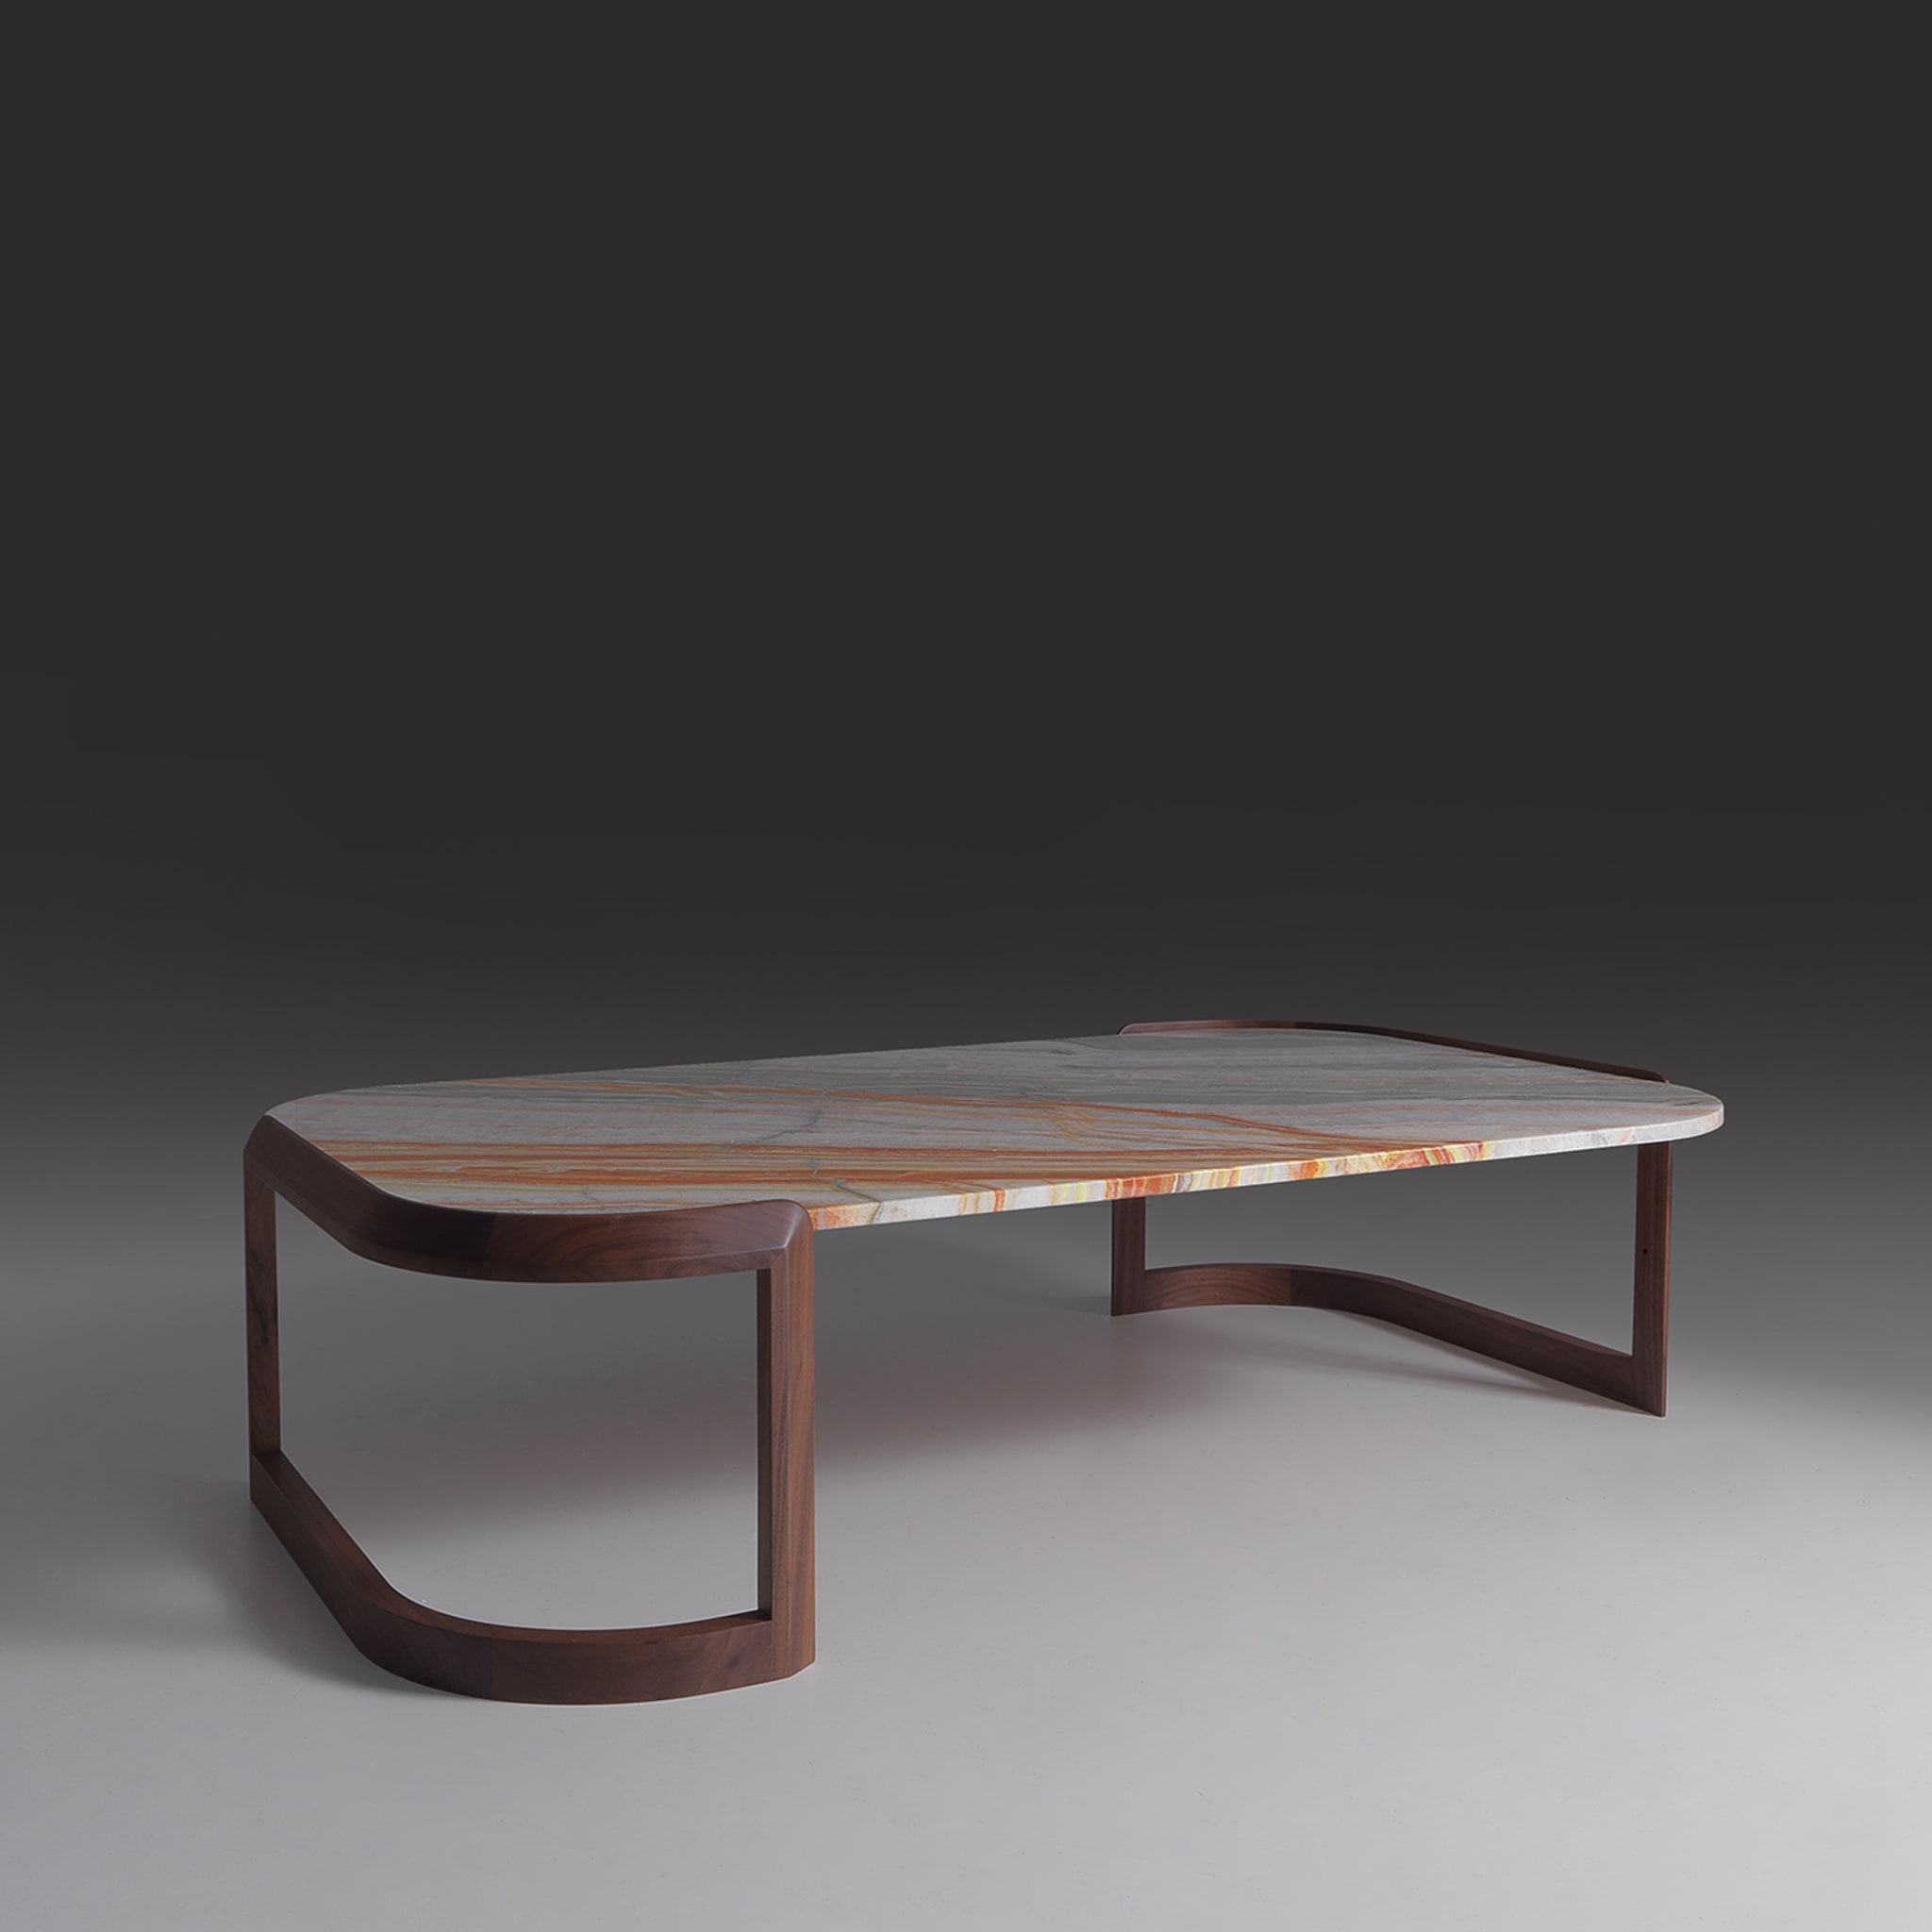 Bembo Low Coffee Table - Alternative view 2